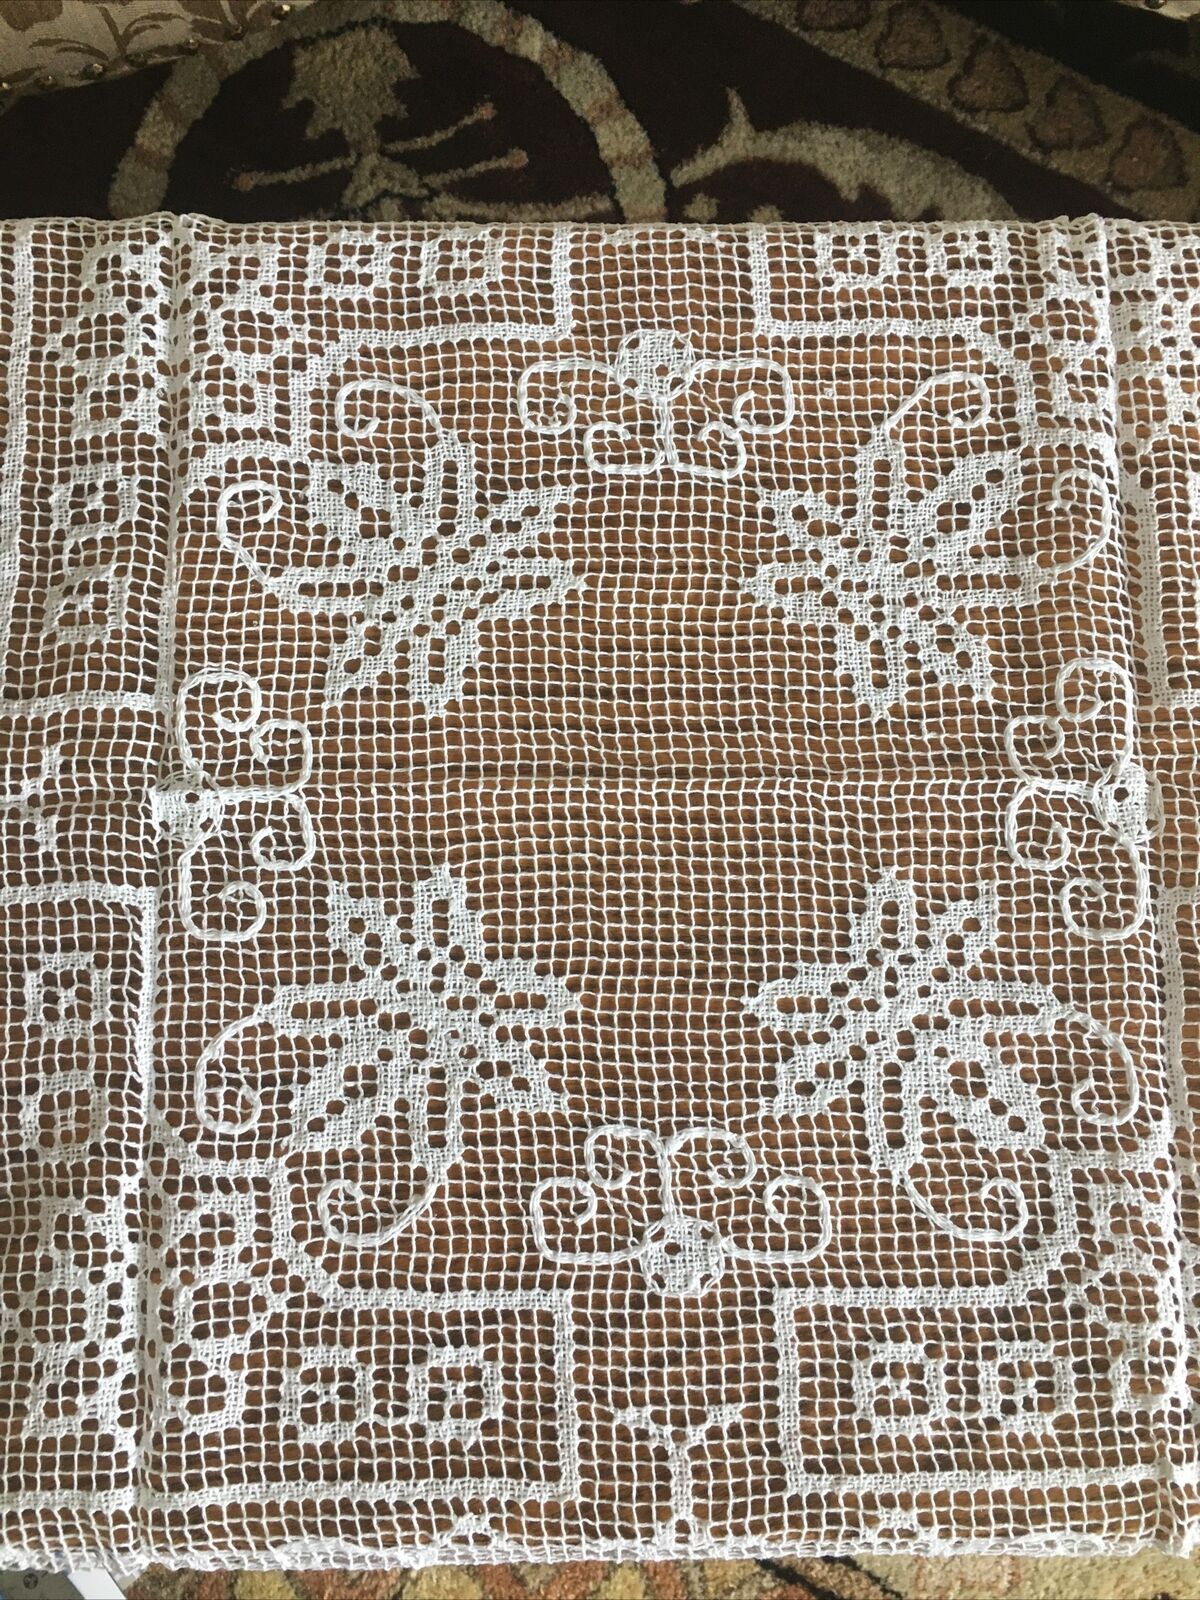 white Lace Tablecloth 35 Square Table Topper Net Darning Lace